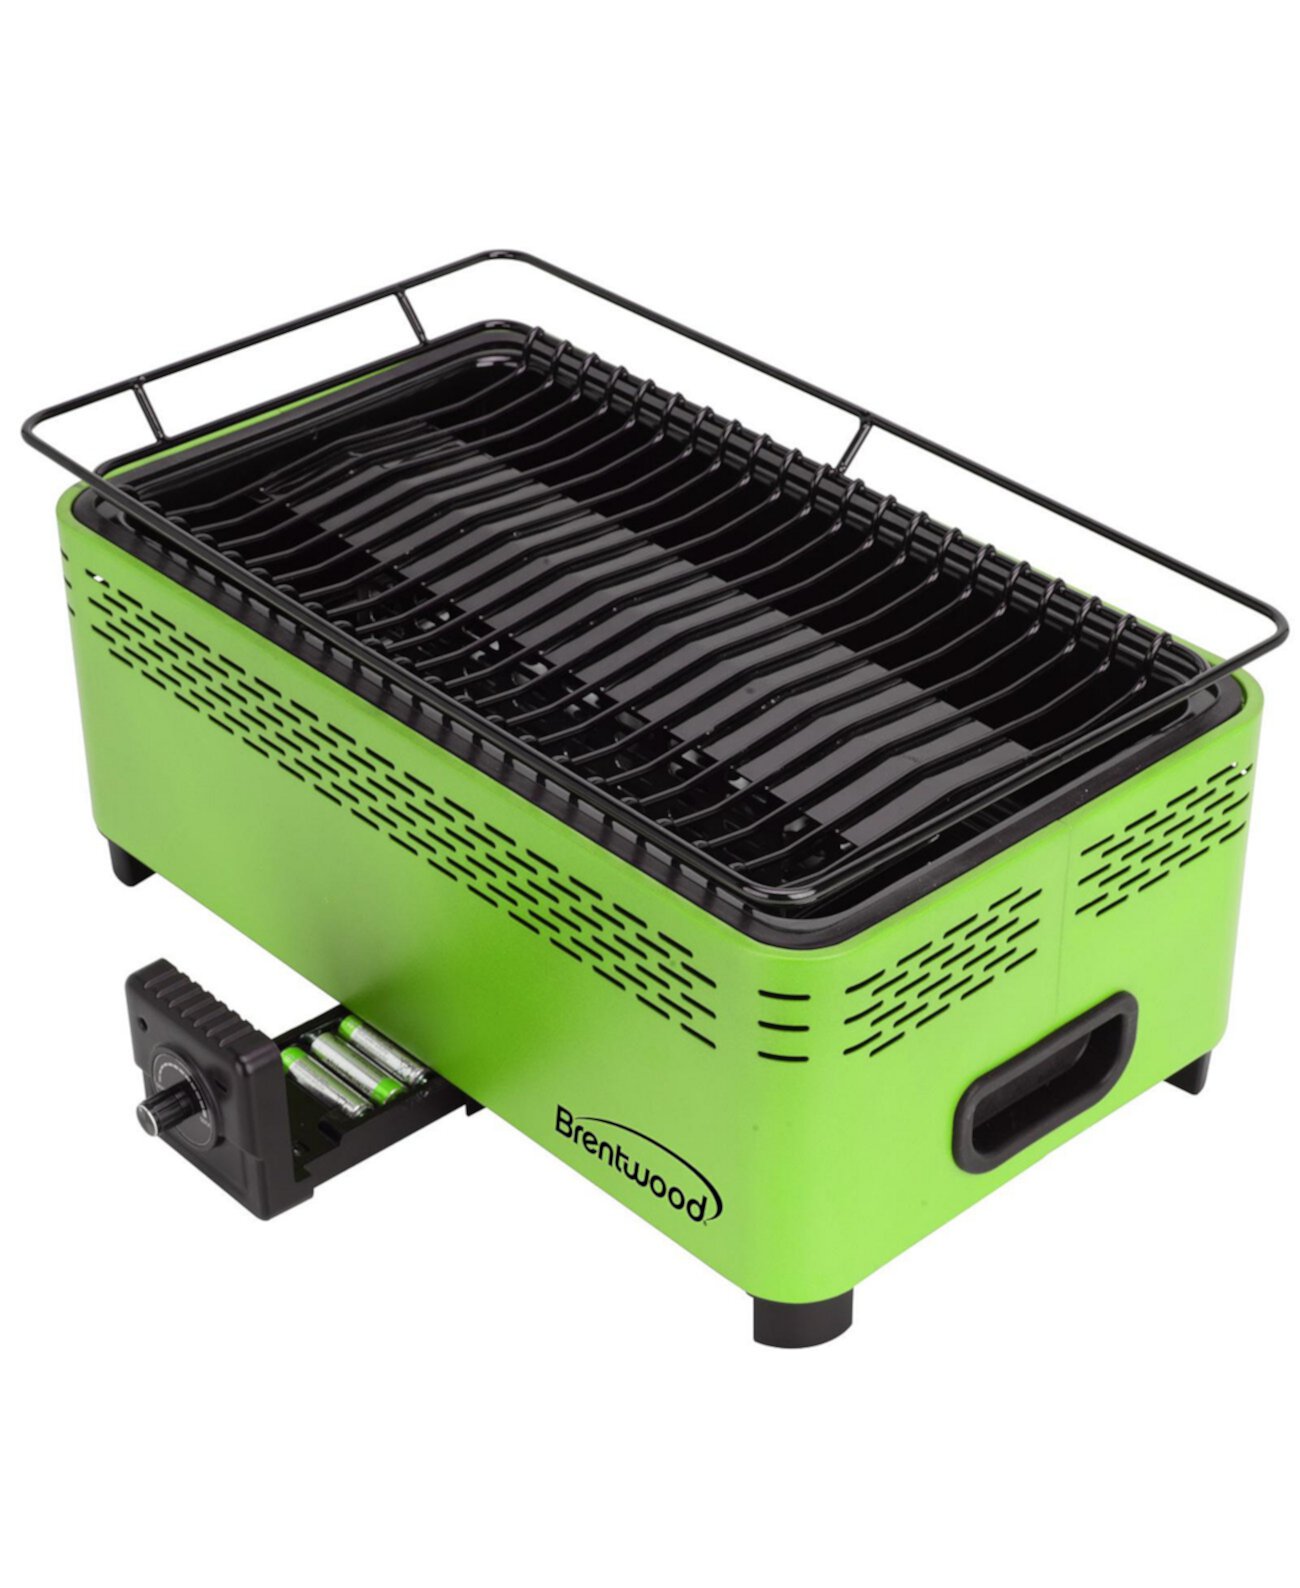 Brentwood BBF-31G Non-Stick Smokeless Portable BBQ, Green Brentwood